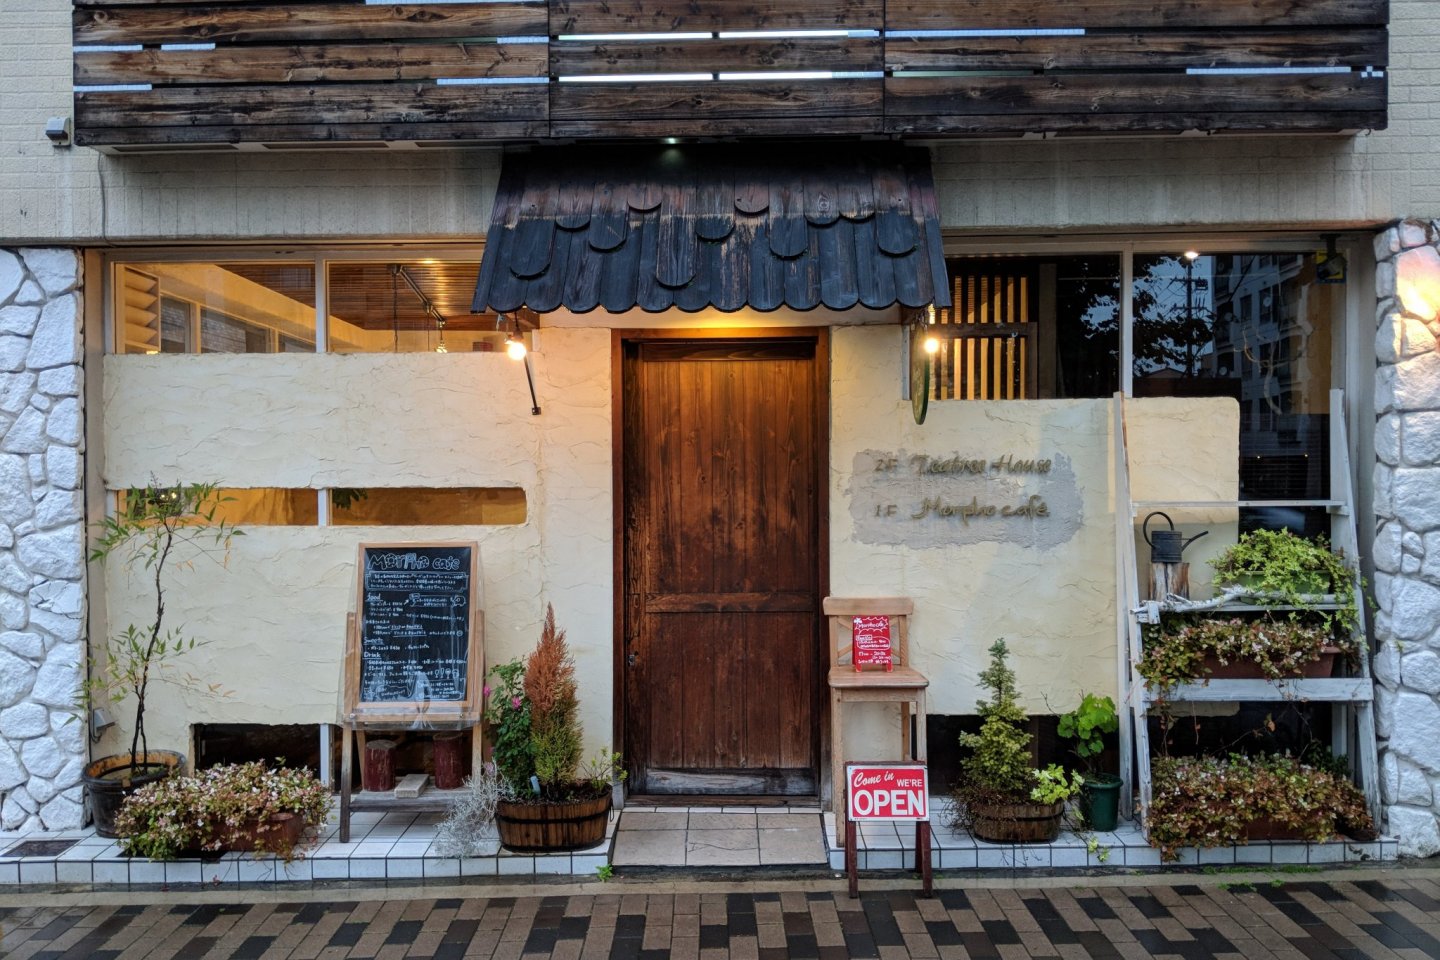 The exterior of Morpho Cafe - warm, charming and inviting.